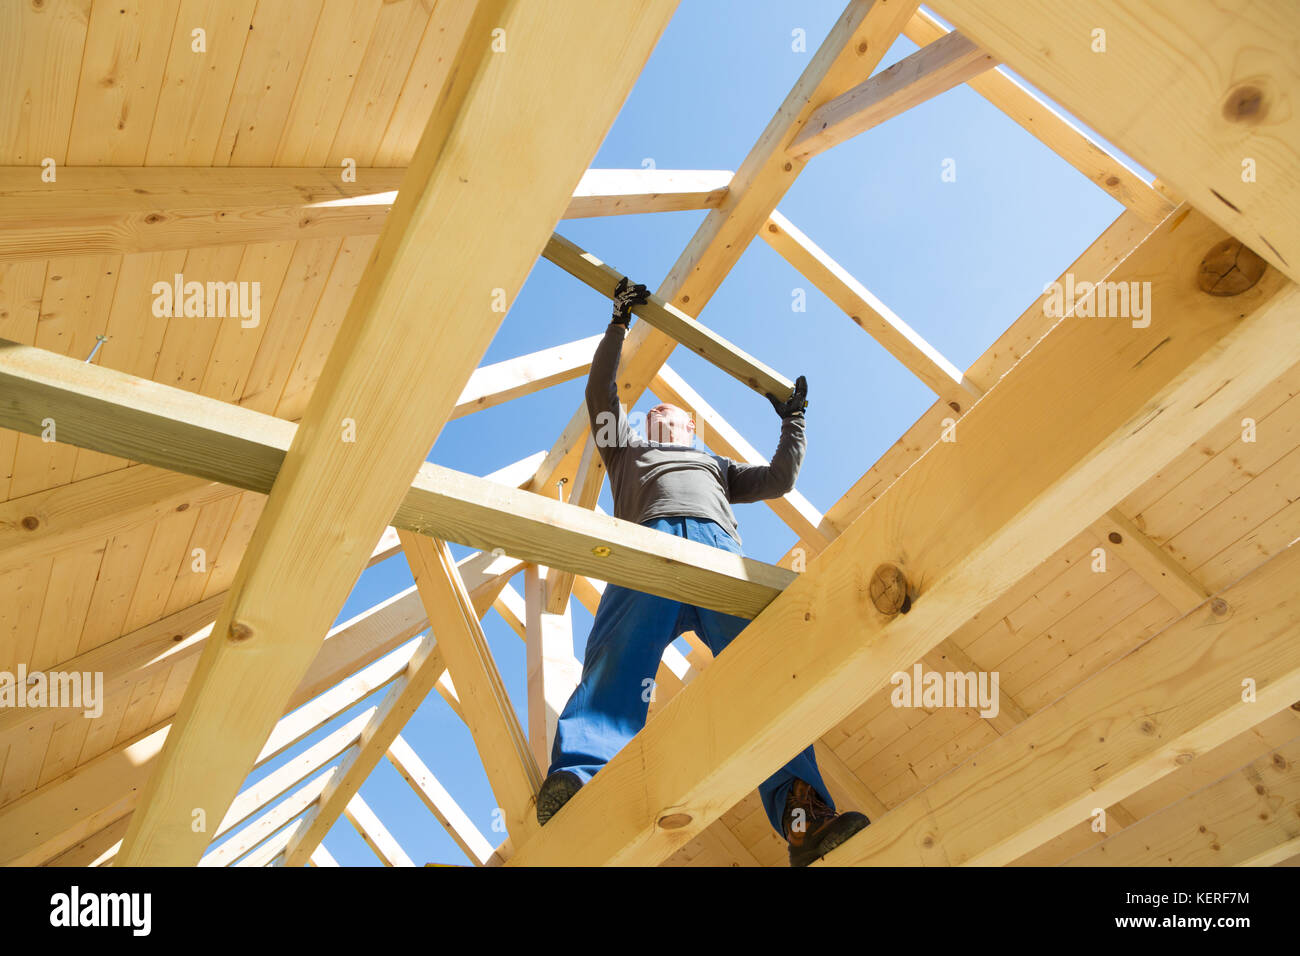 Builder at work with wooden roof construction. Stock Photo